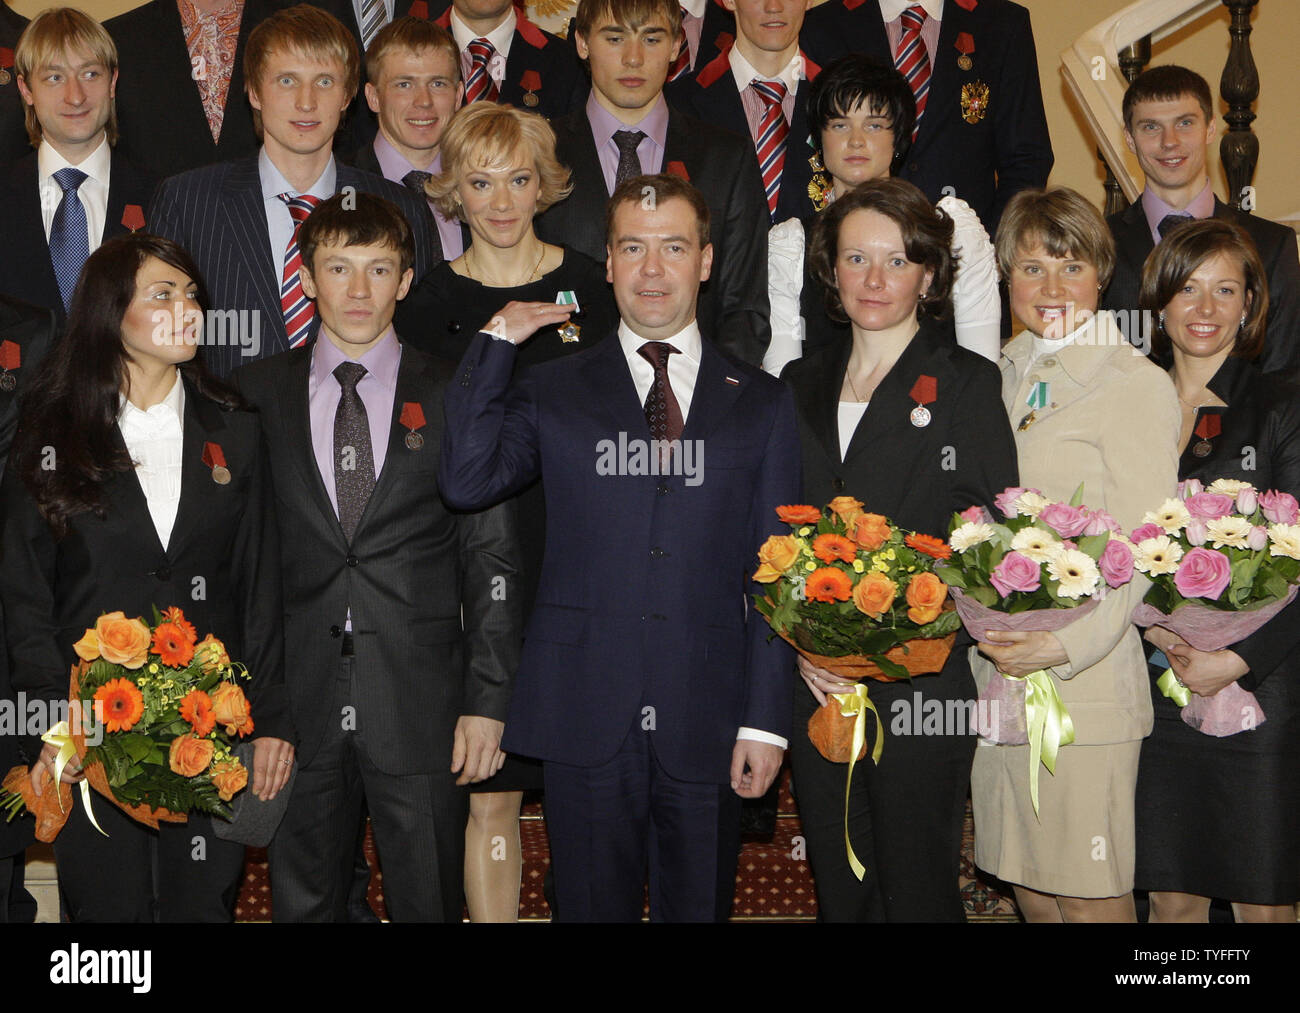 Russian President Dmitry Medvedev (C) poses for a group photo with national team athletes who won medals at the Winter Olympic Games in Vancouver during a reception in the Kremlin in Moscow on March 15, 2010. UPI/Alex Natin Stock Photo